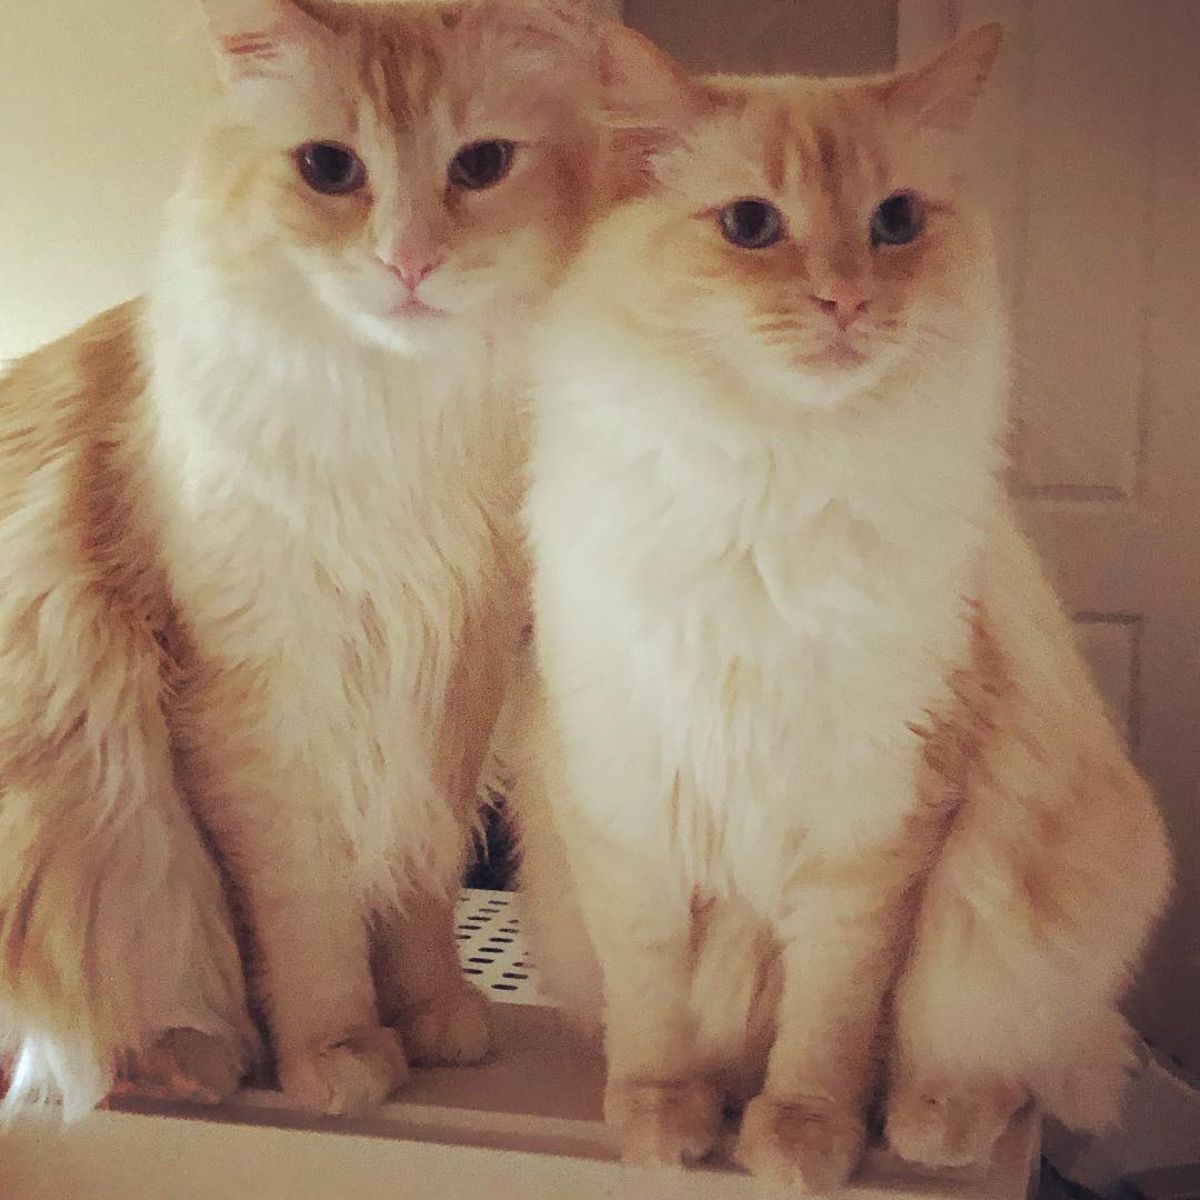 Twp cream maine coons sitting on a table.